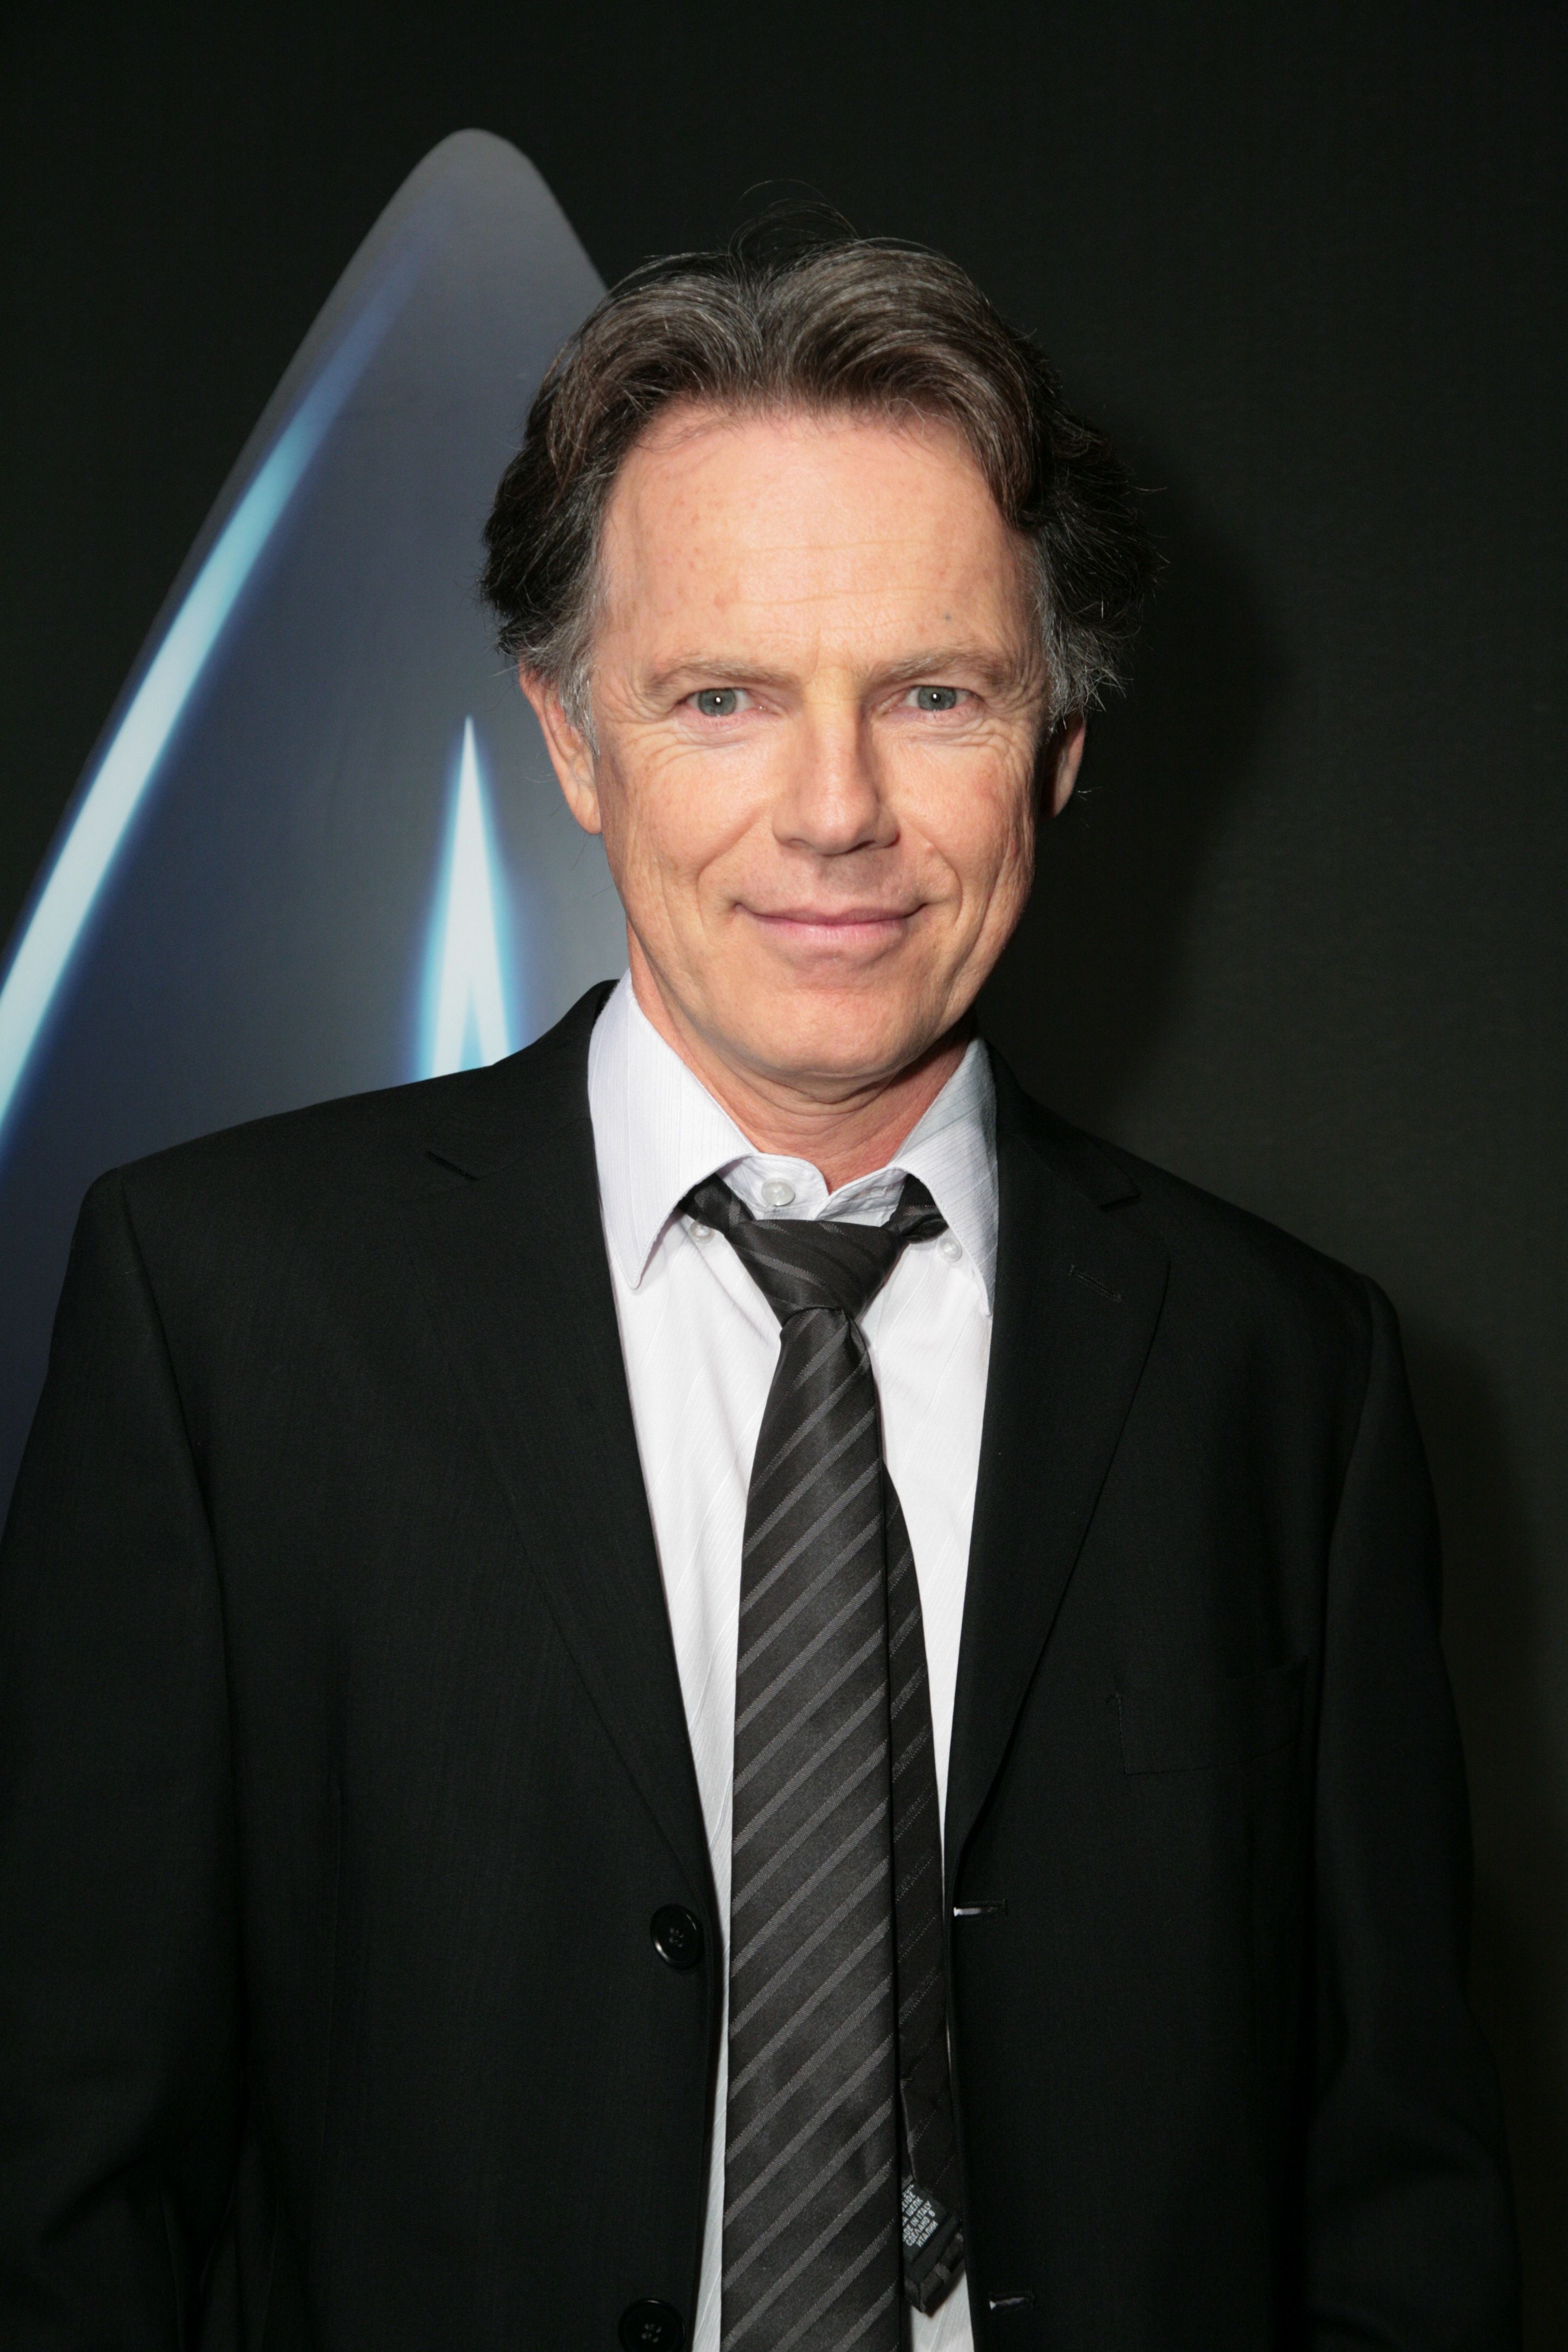 Bruce Greenwood Isn't Sure If He'll Appear in Star Trek 2We were recently at the DVD launch party for the summer blockbuster {0}, which is currently available on DVD and {1} shelves now. Among the many actors we spoke with at the event was Bruce Greenwood, who played Captain Pike in the film. He revealed that he'd like to appear in {2}, but isn't sure it will happen.